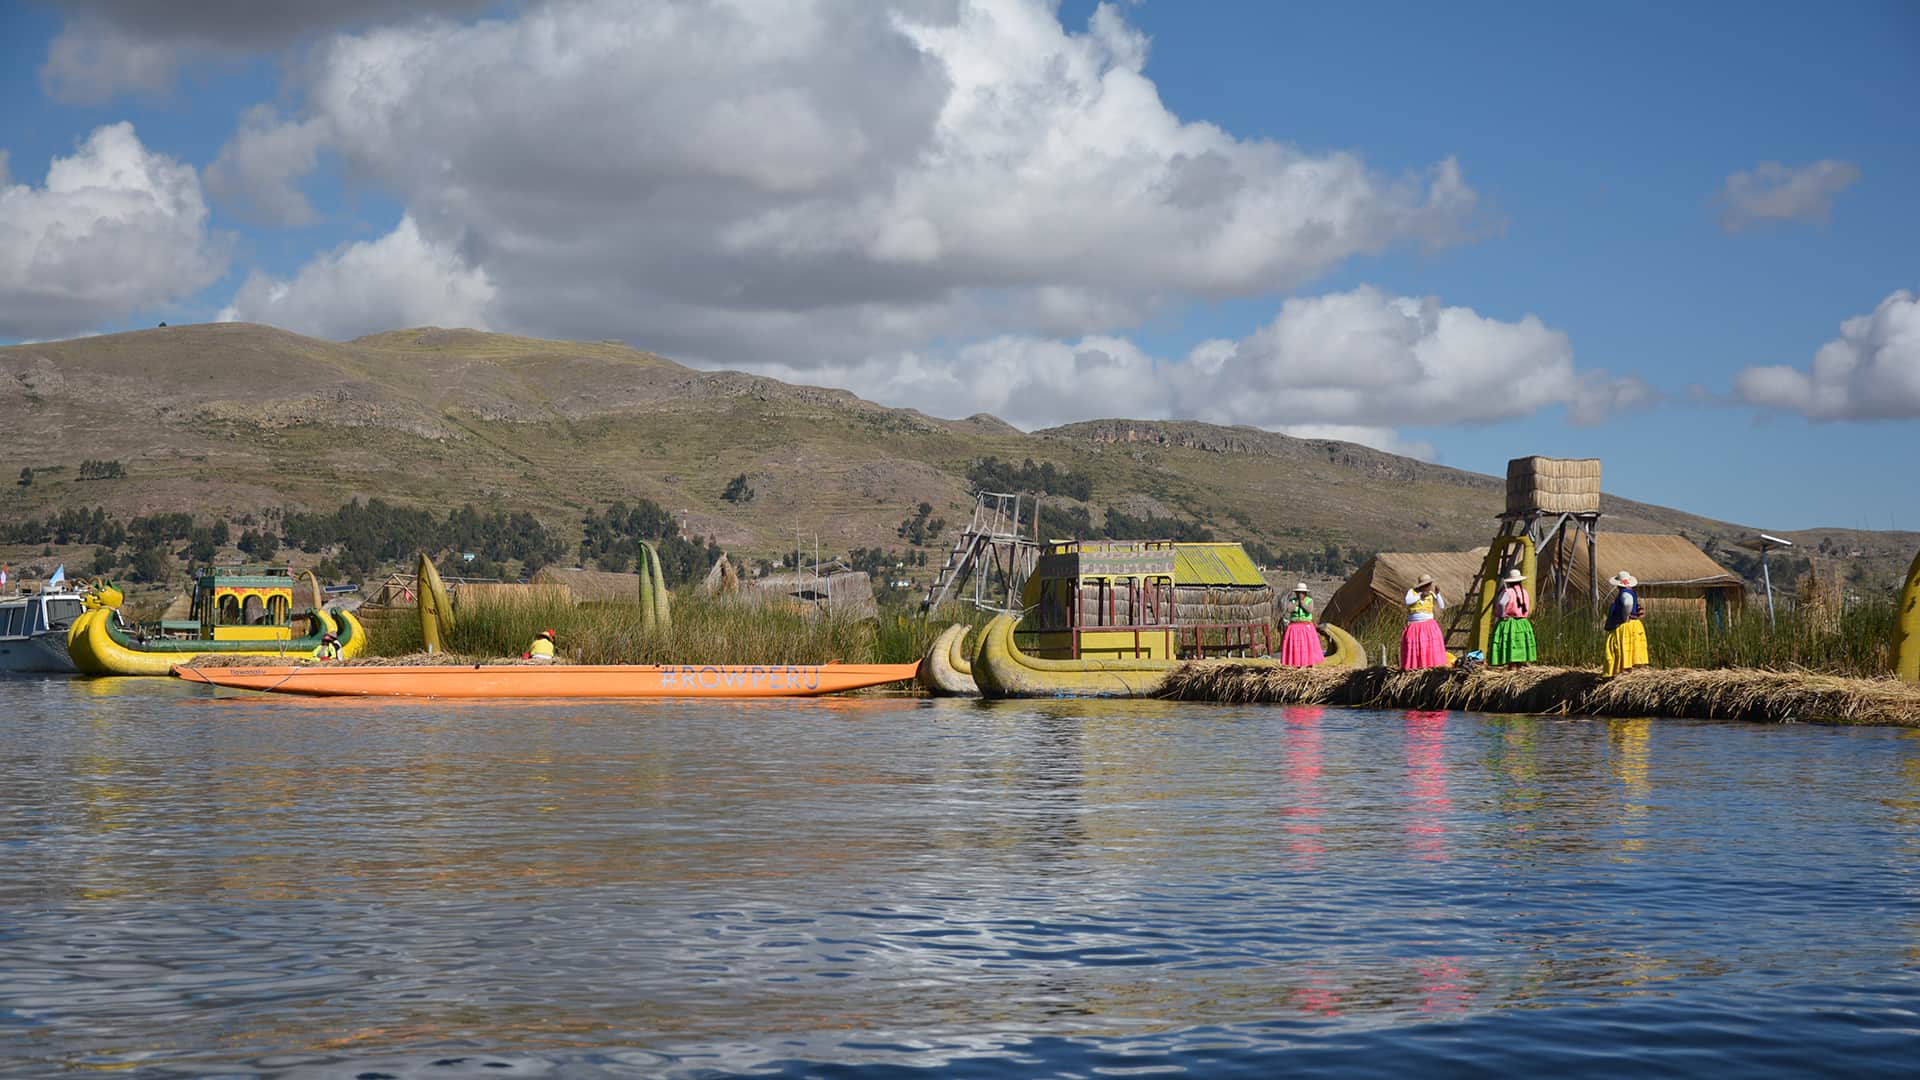 Nice contrast between Polinesian canoes and totora boats in a floating island | Responsible Travel Peru